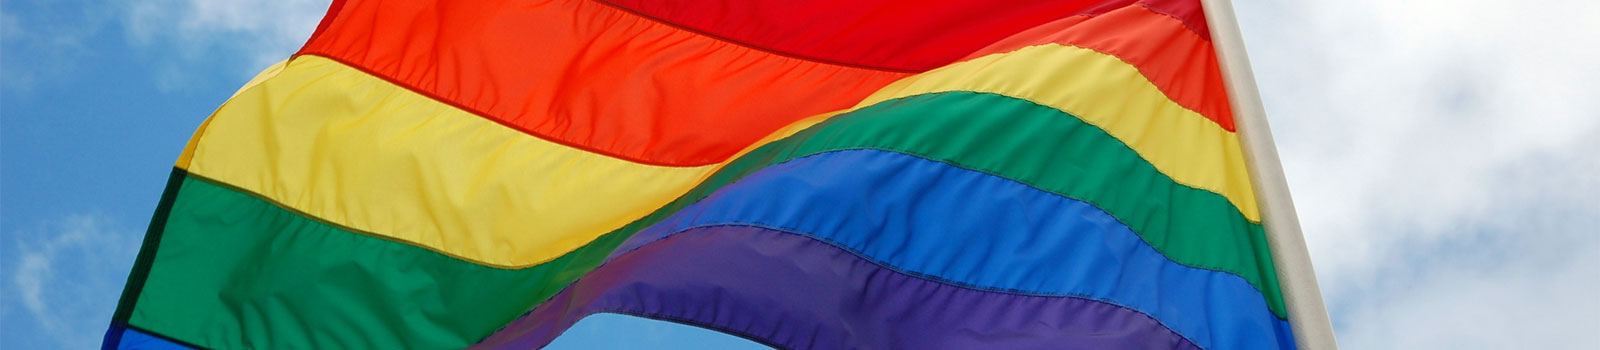 photo of a rainbow flag celebrating Lesbian, Gay, Bisexual and Transgender people